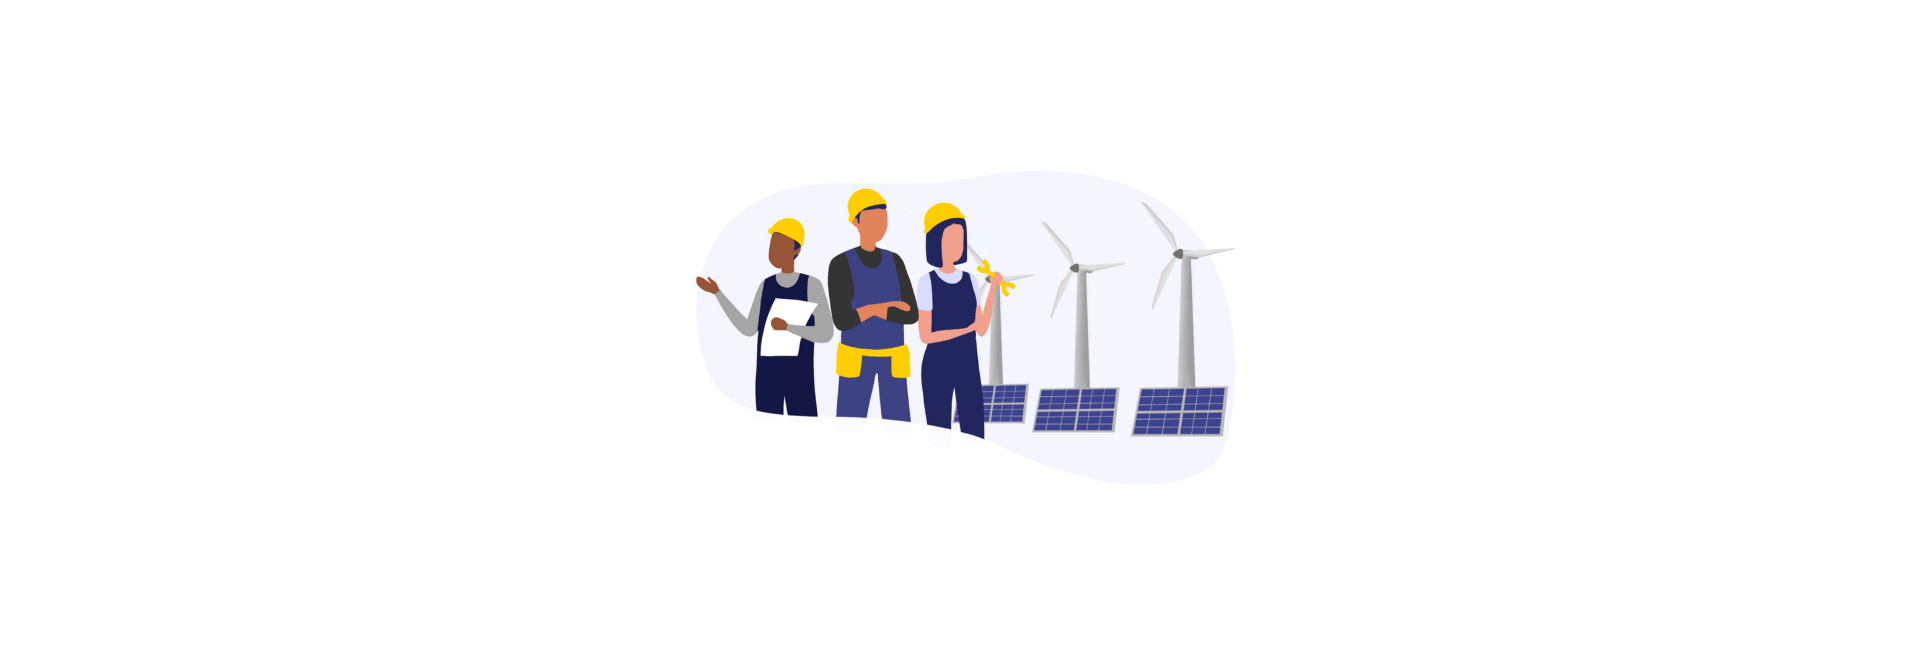 a81bdea8b6e57b6e9a74f3895429567e8161.7 tips to get you started on renewable energy projects.png